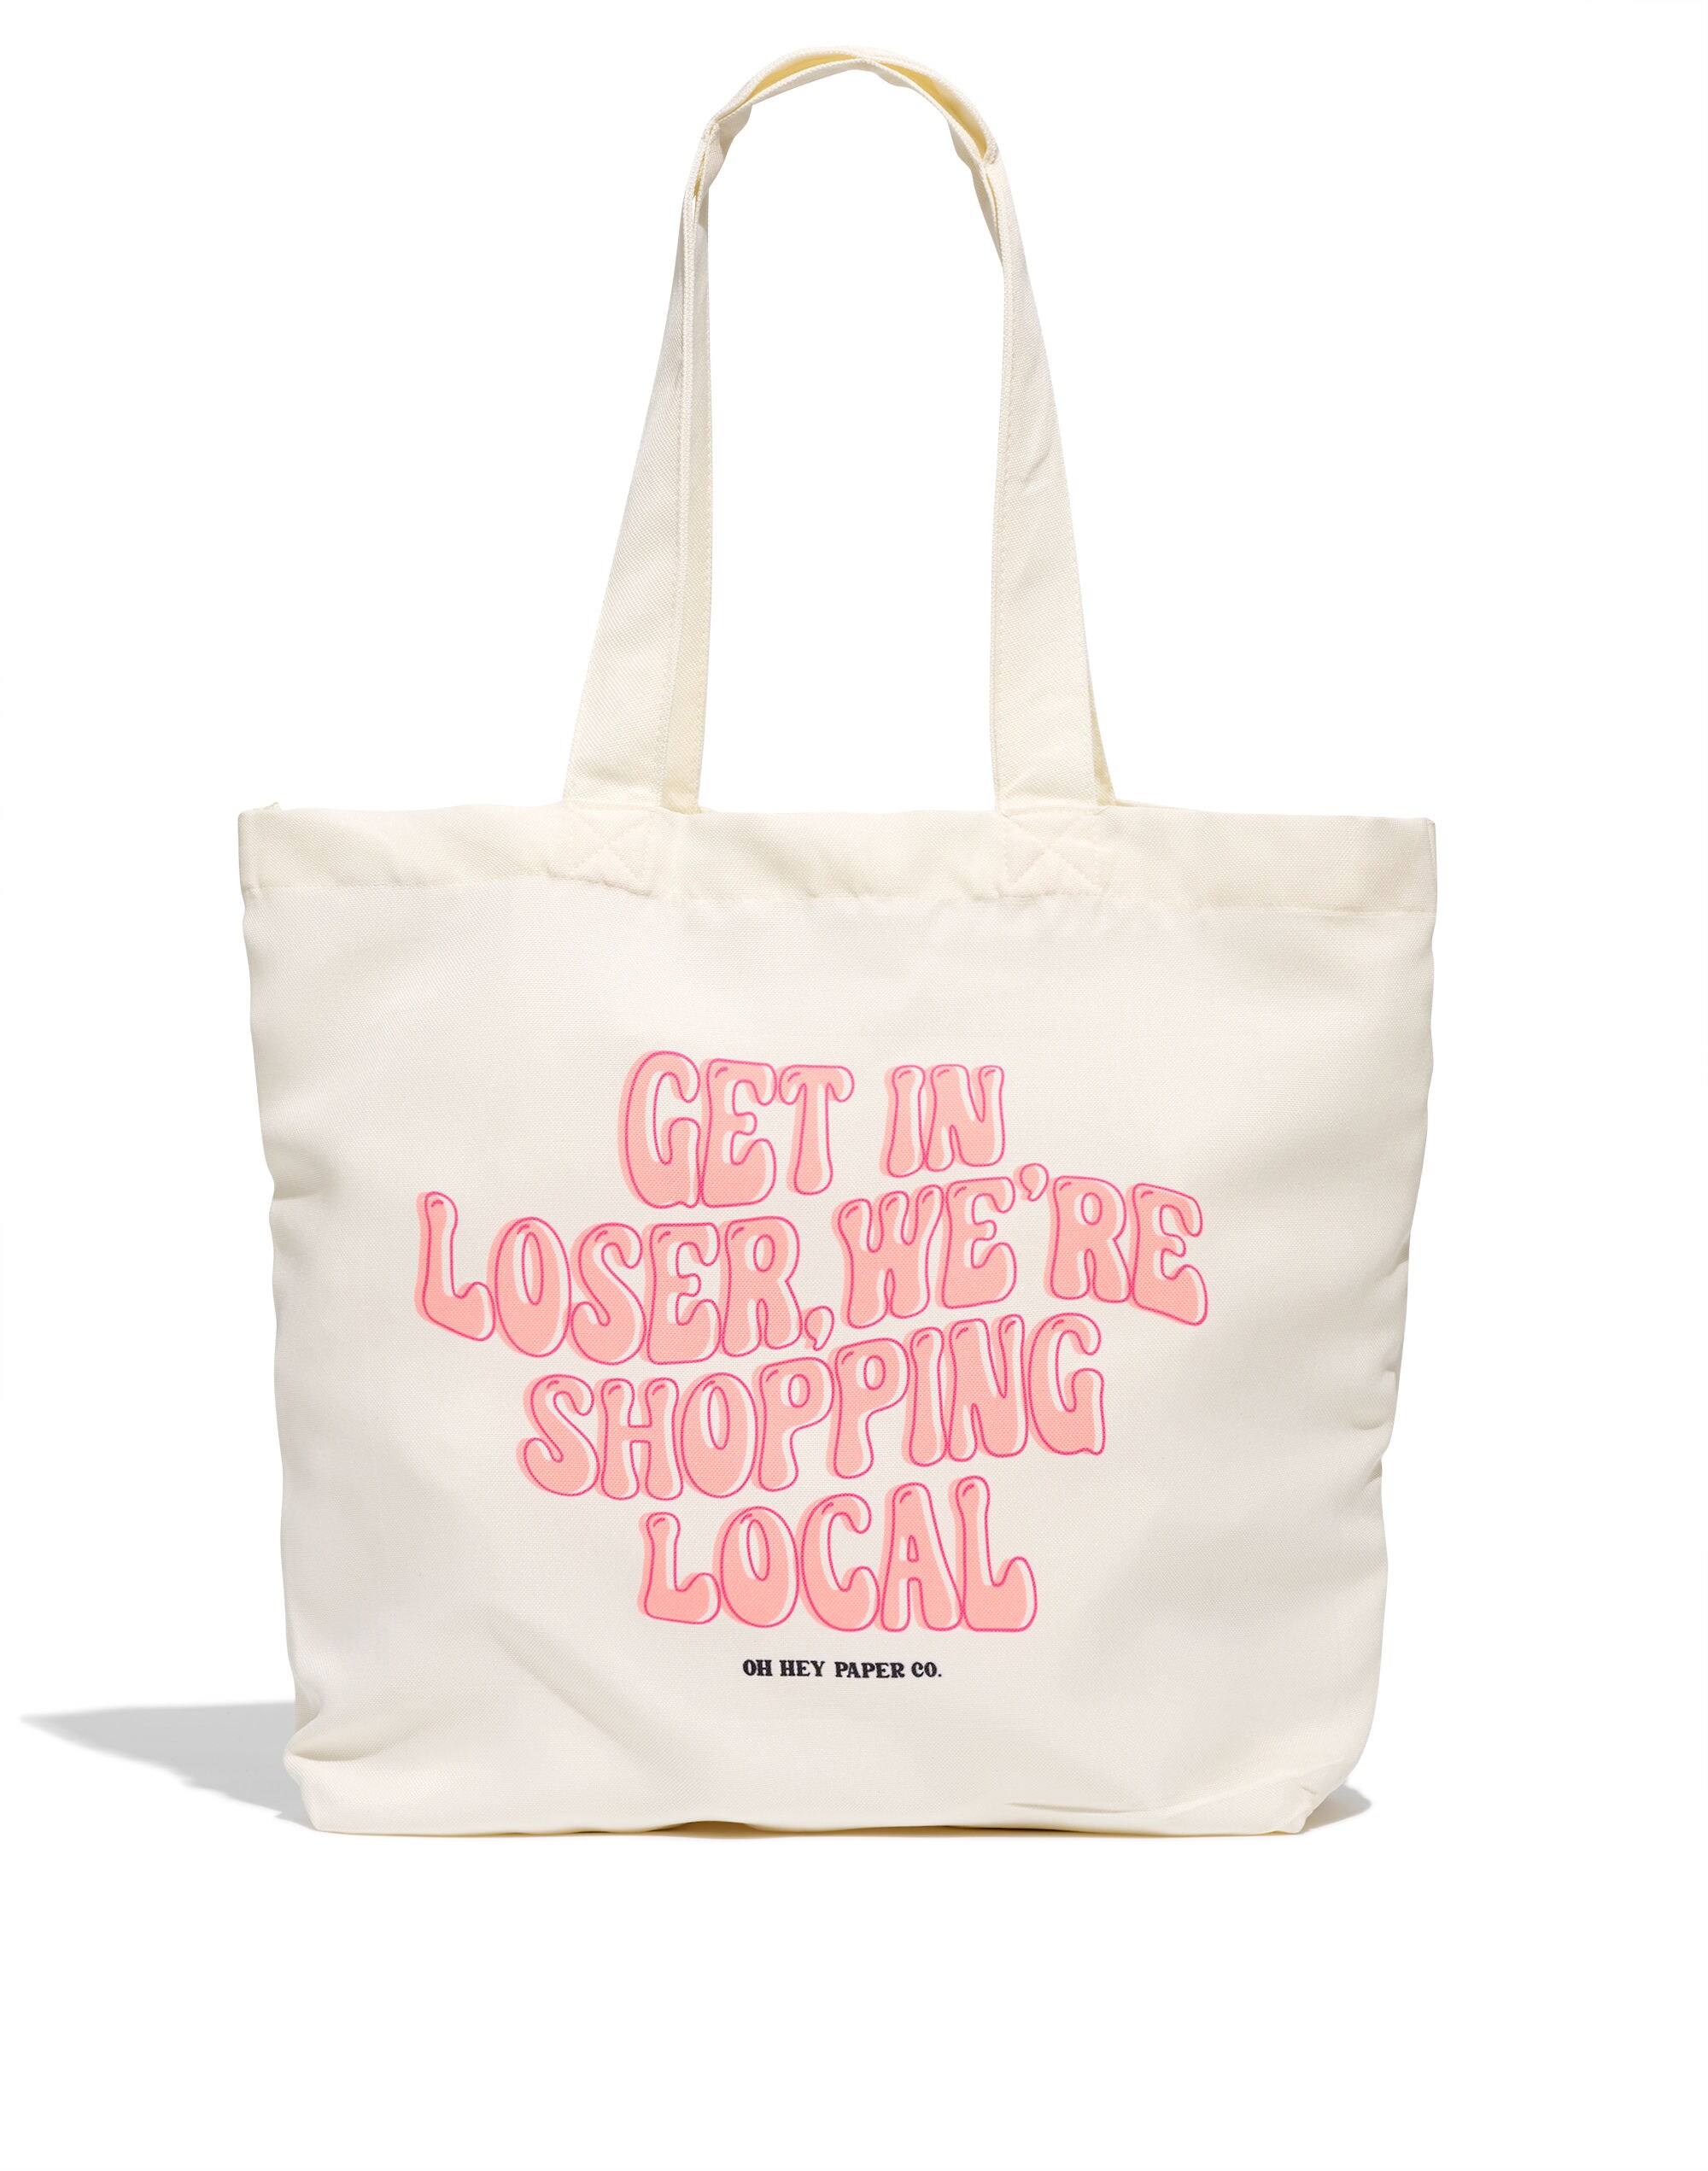 Oh Hey Paper Co. Shopping Local Tote Bag